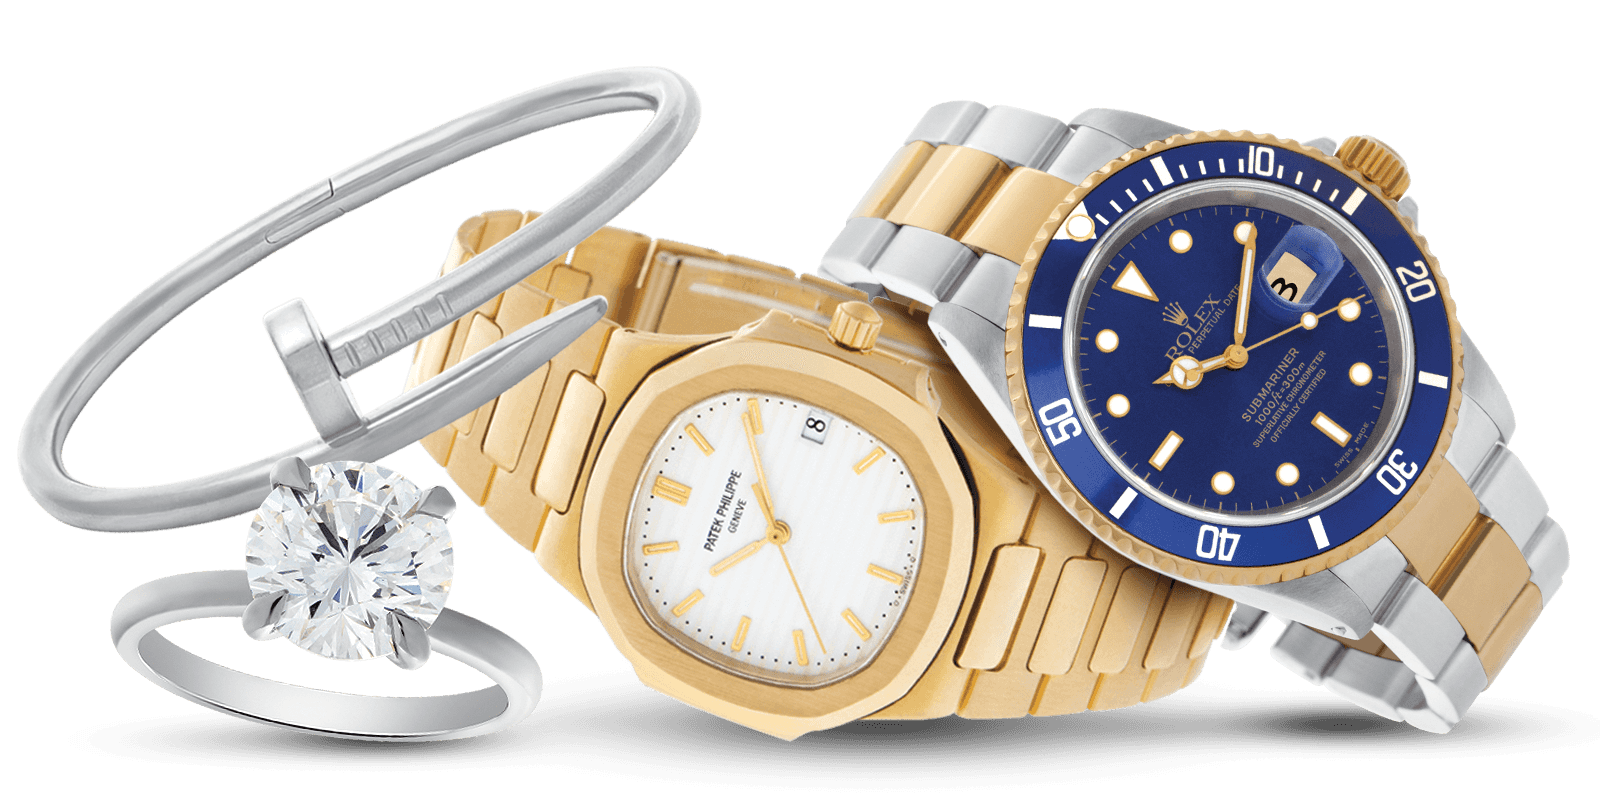 Sell Watches for Cash | Watch Buyers in San Diego | Leo Hamel